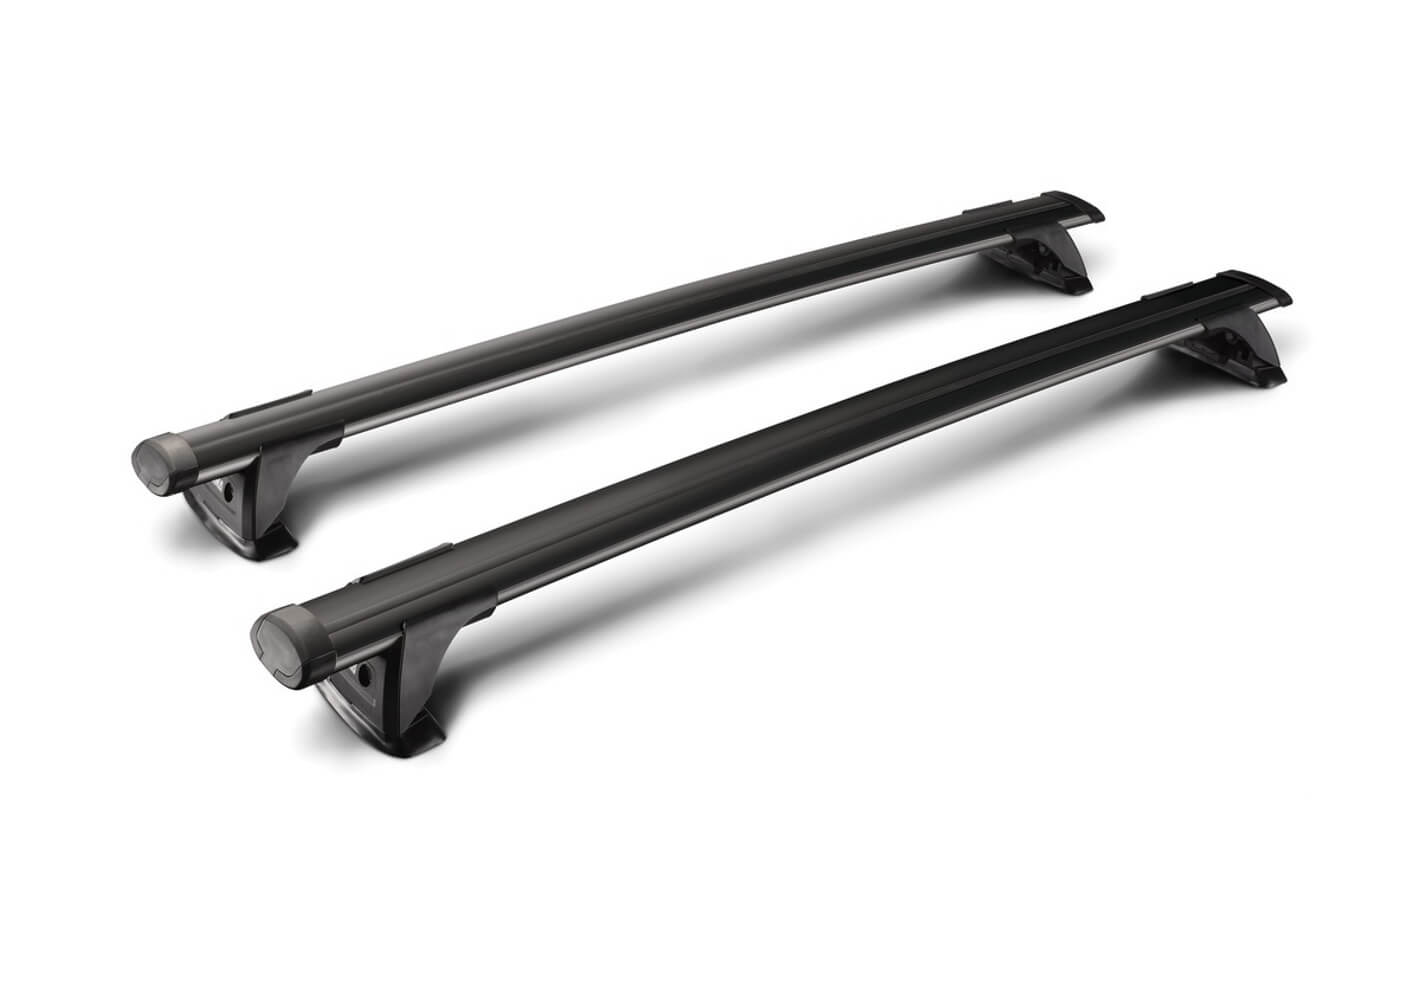 BMW 5 series GT (2009 to 2017):Yakima roof bars package - S17B black bars with K629 kit